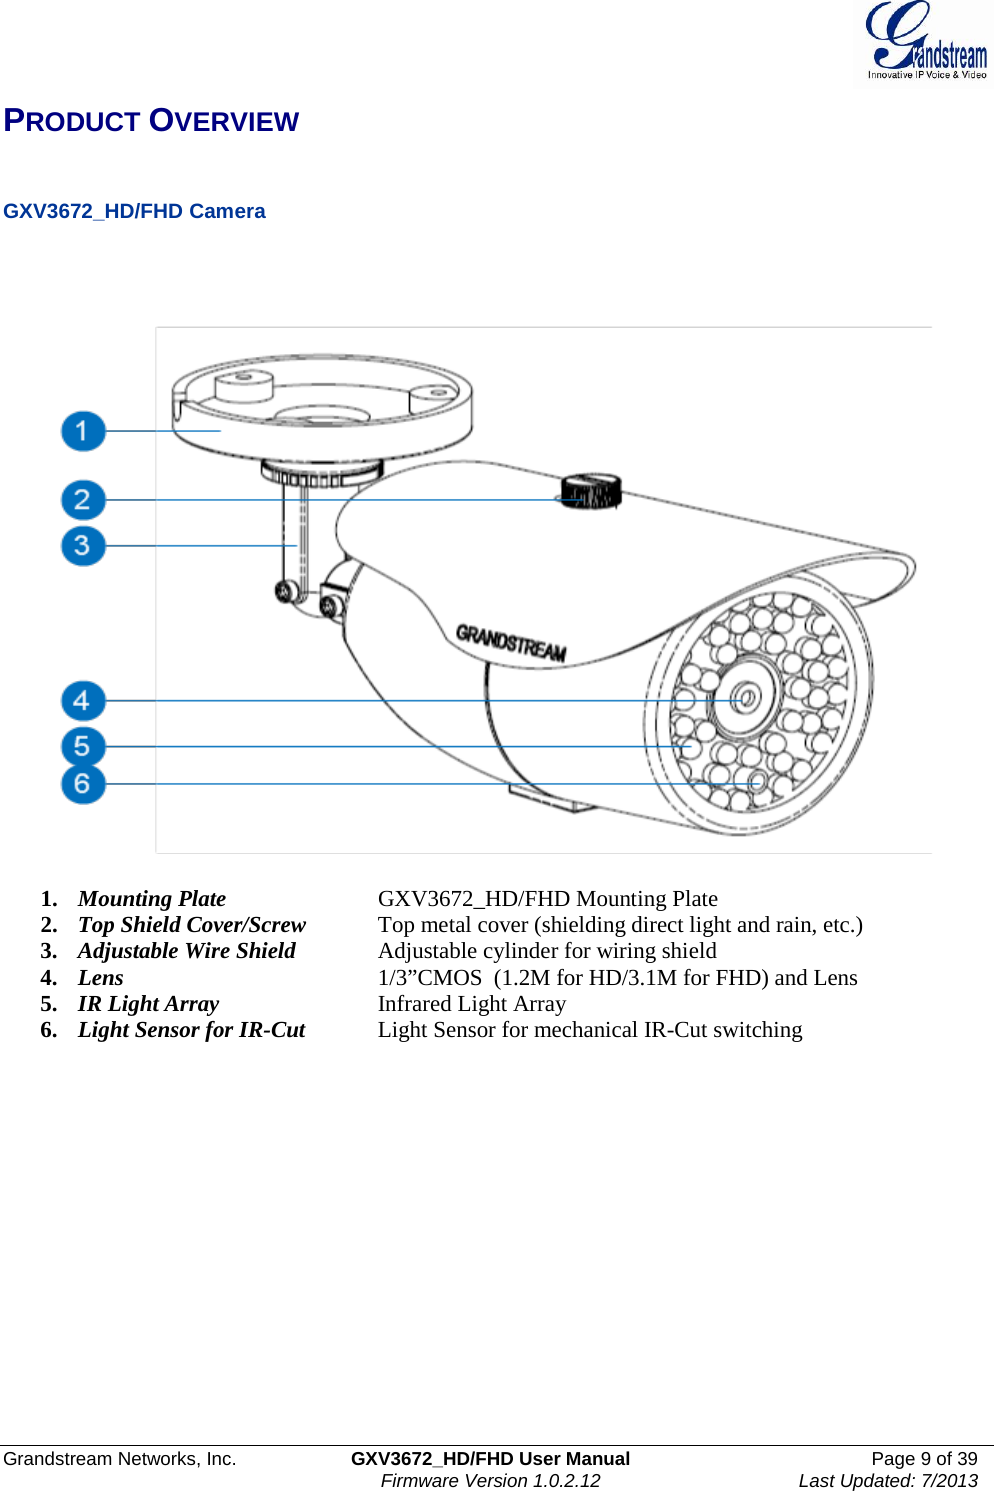  Grandstream Networks, Inc. GXV3672_HD/FHD User Manual Page 9 of 39   Firmware Version 1.0.2.12 Last Updated: 7/2013  PRODUCT OVERVIEW   GXV3672_HD/FHD Camera        1. Mounting Plate   GXV3672_HD/FHD Mounting Plate 2. Top Shield Cover/Screw Top metal cover (shielding direct light and rain, etc.) 3. Adjustable Wire Shield   Adjustable cylinder for wiring shield 4. Lens    1/3”CMOS  (1.2M for HD/3.1M for FHD) and Lens  5. IR Light Array      Infrared Light Array 6. Light Sensor for IR-Cut  Light Sensor for mechanical IR-Cut switching   